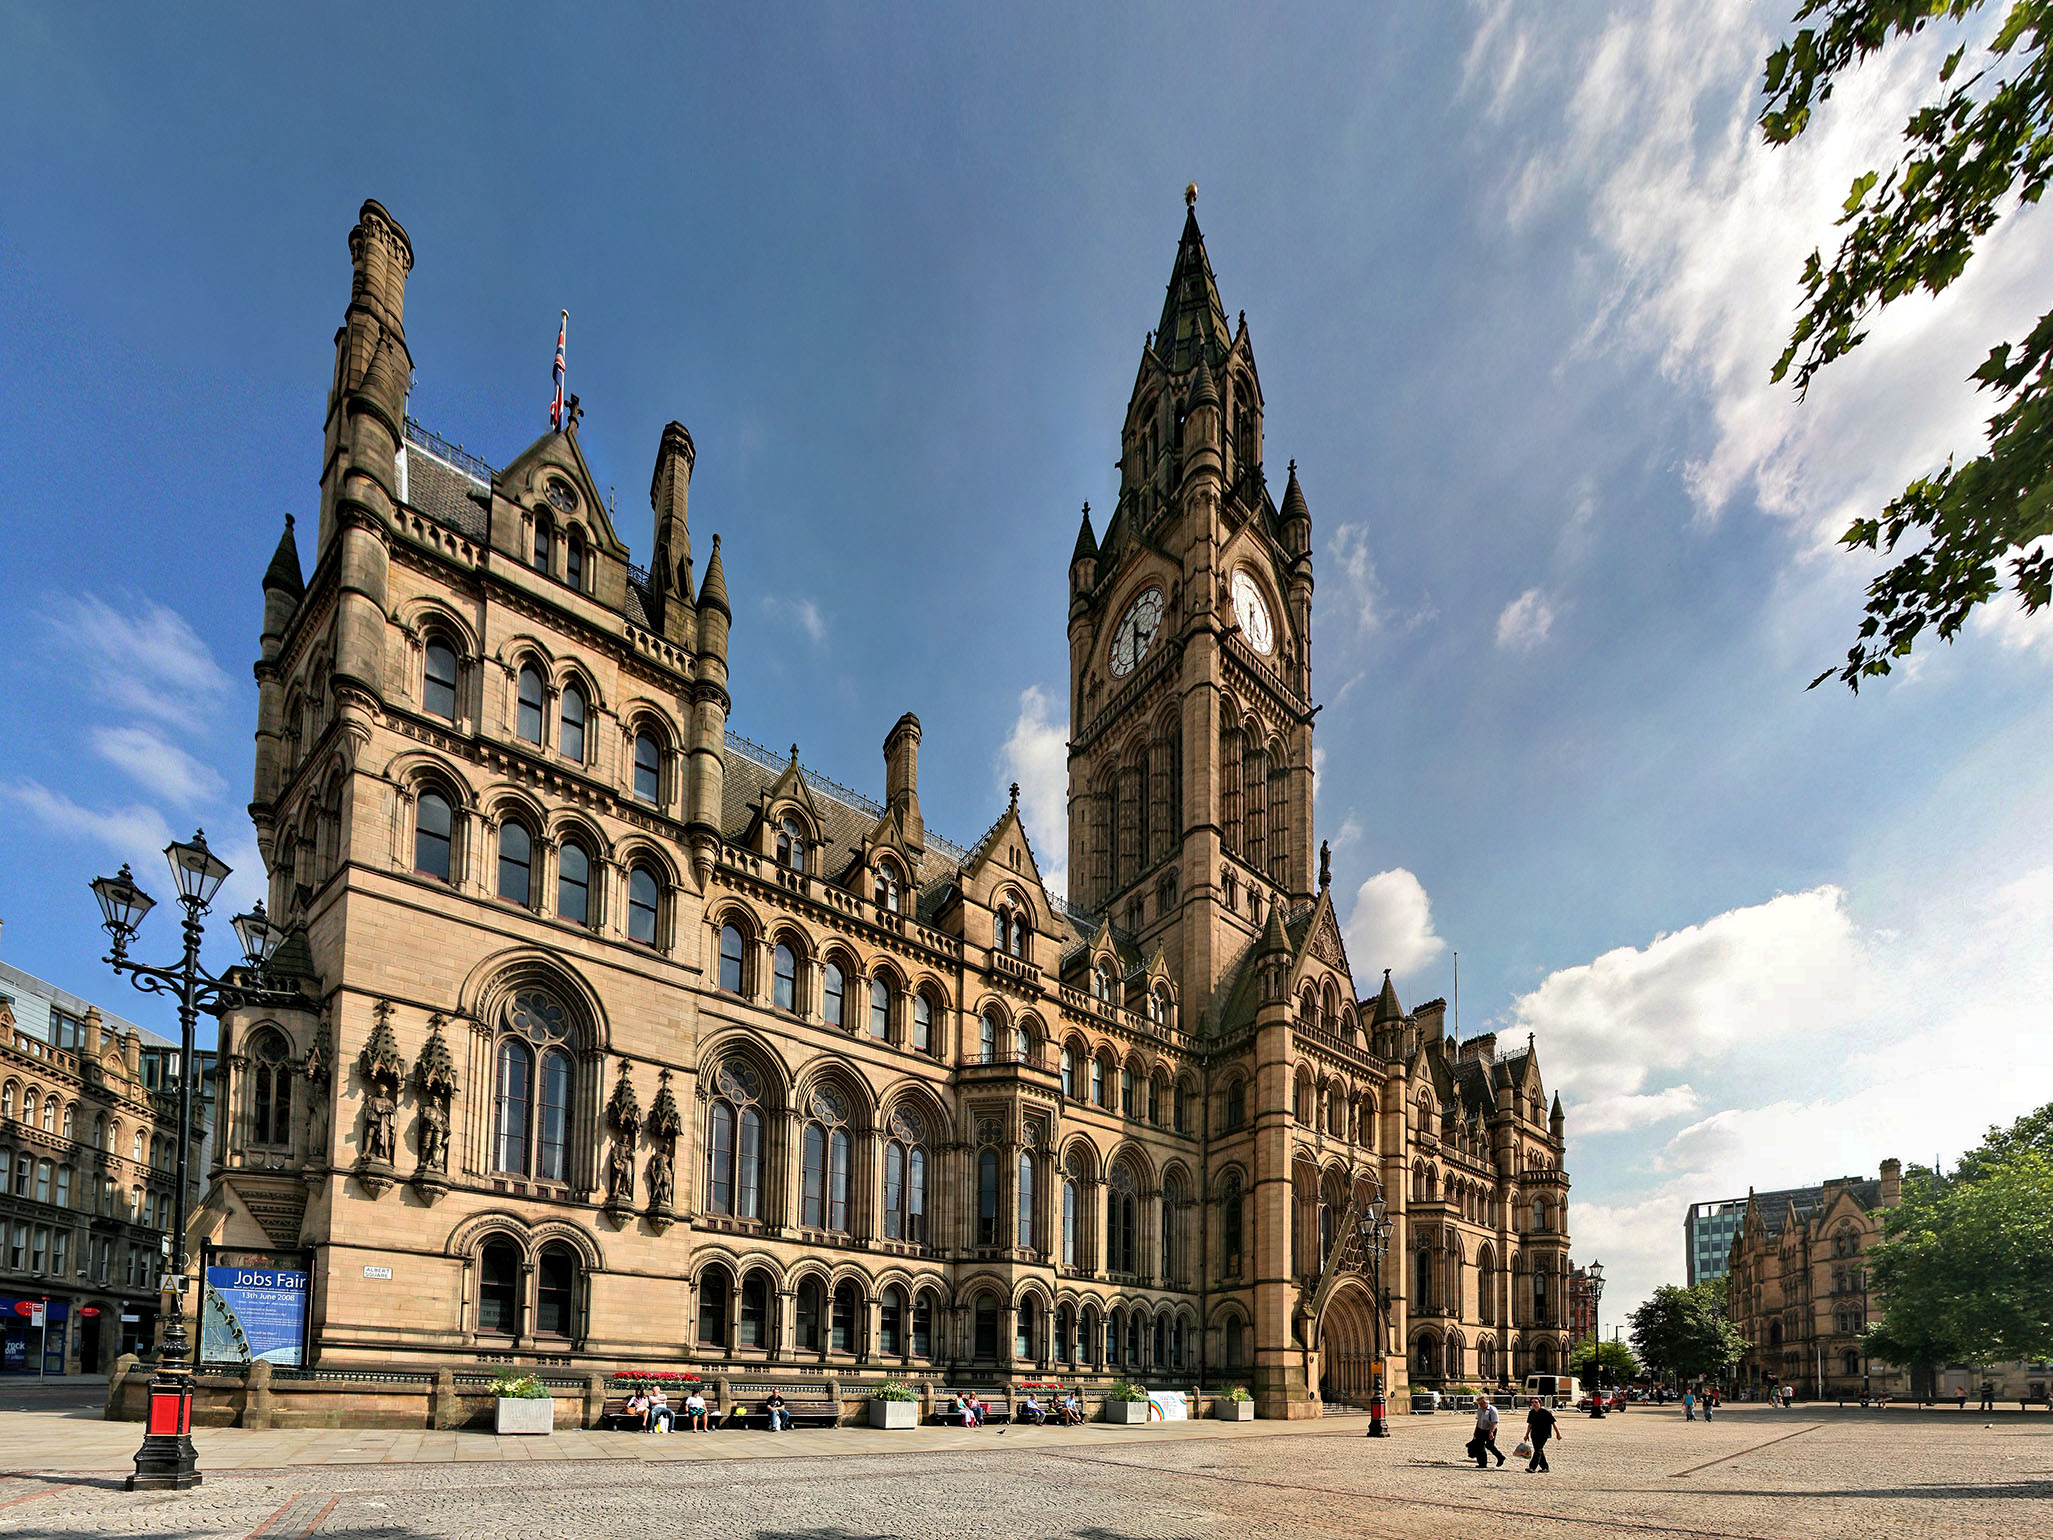 Image of the Grade I listed Manchester Town Hall